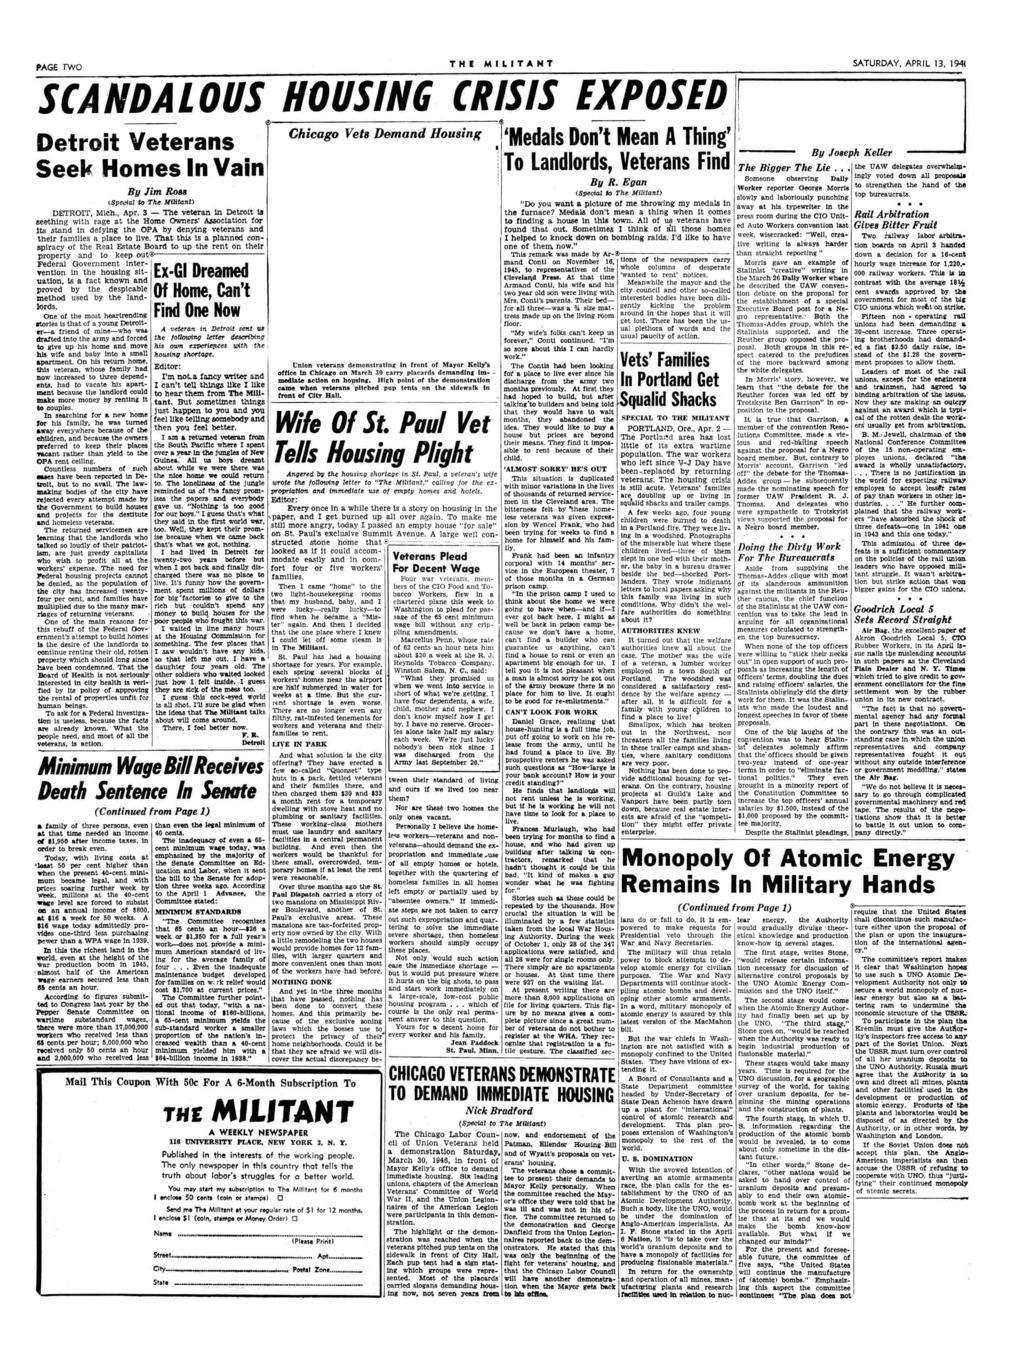 PAGE TWO THE MILITANT SATURDAY, APRIL 13, 1941 SCAN DALOUS HOUSING CRISIS EXPOSED Detroit Veterans Seek Homes In Vain By Jim Ross (Special to The M ilita nt) DETROIT, Mich., Apr.